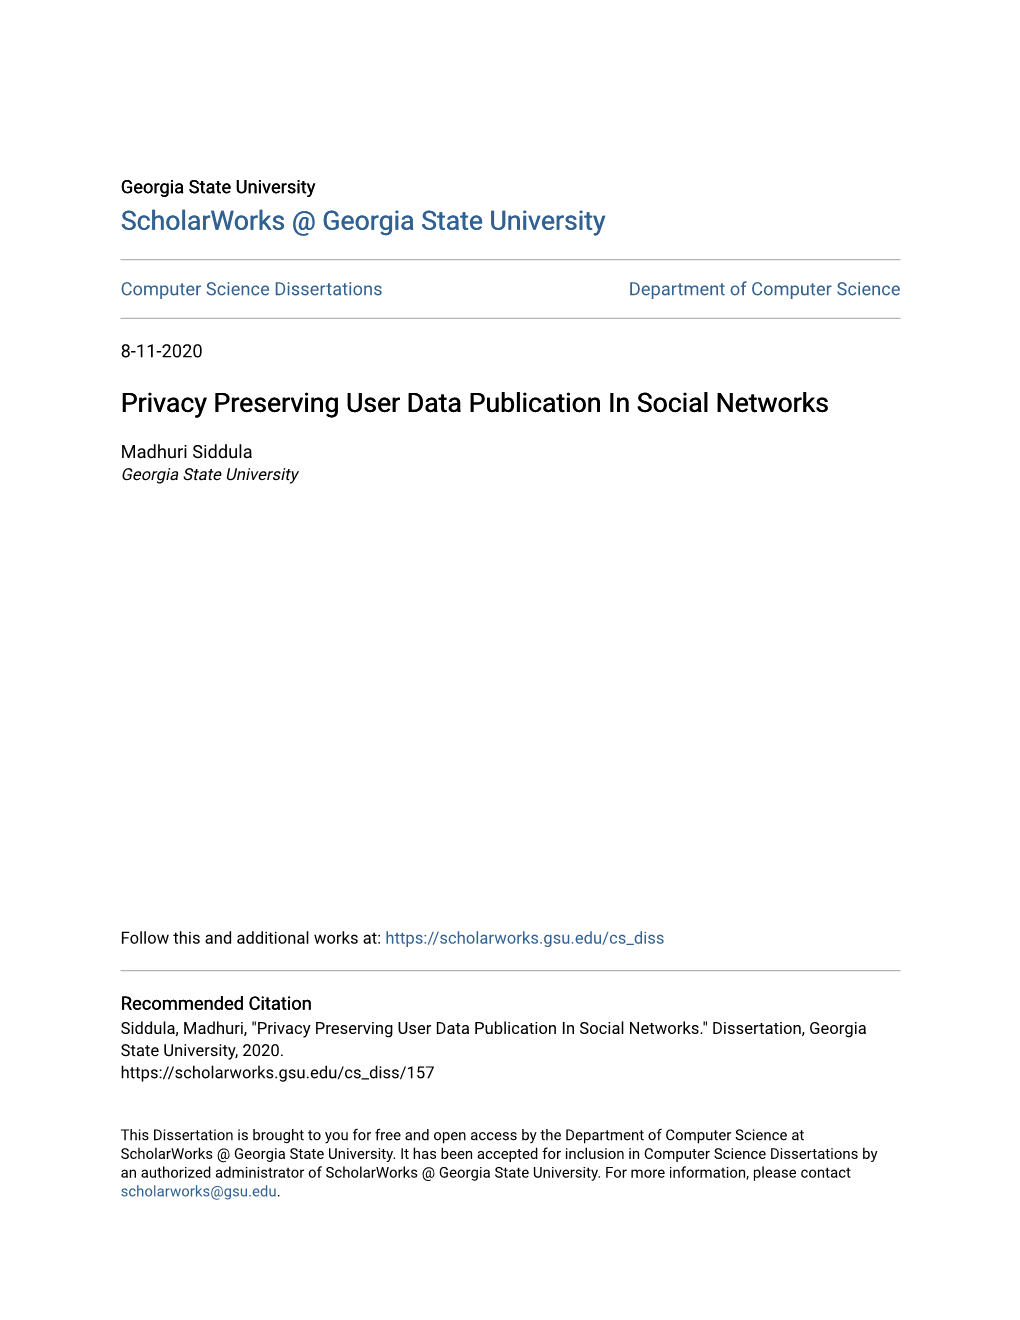 Privacy Preserving User Data Publication in Social Networks